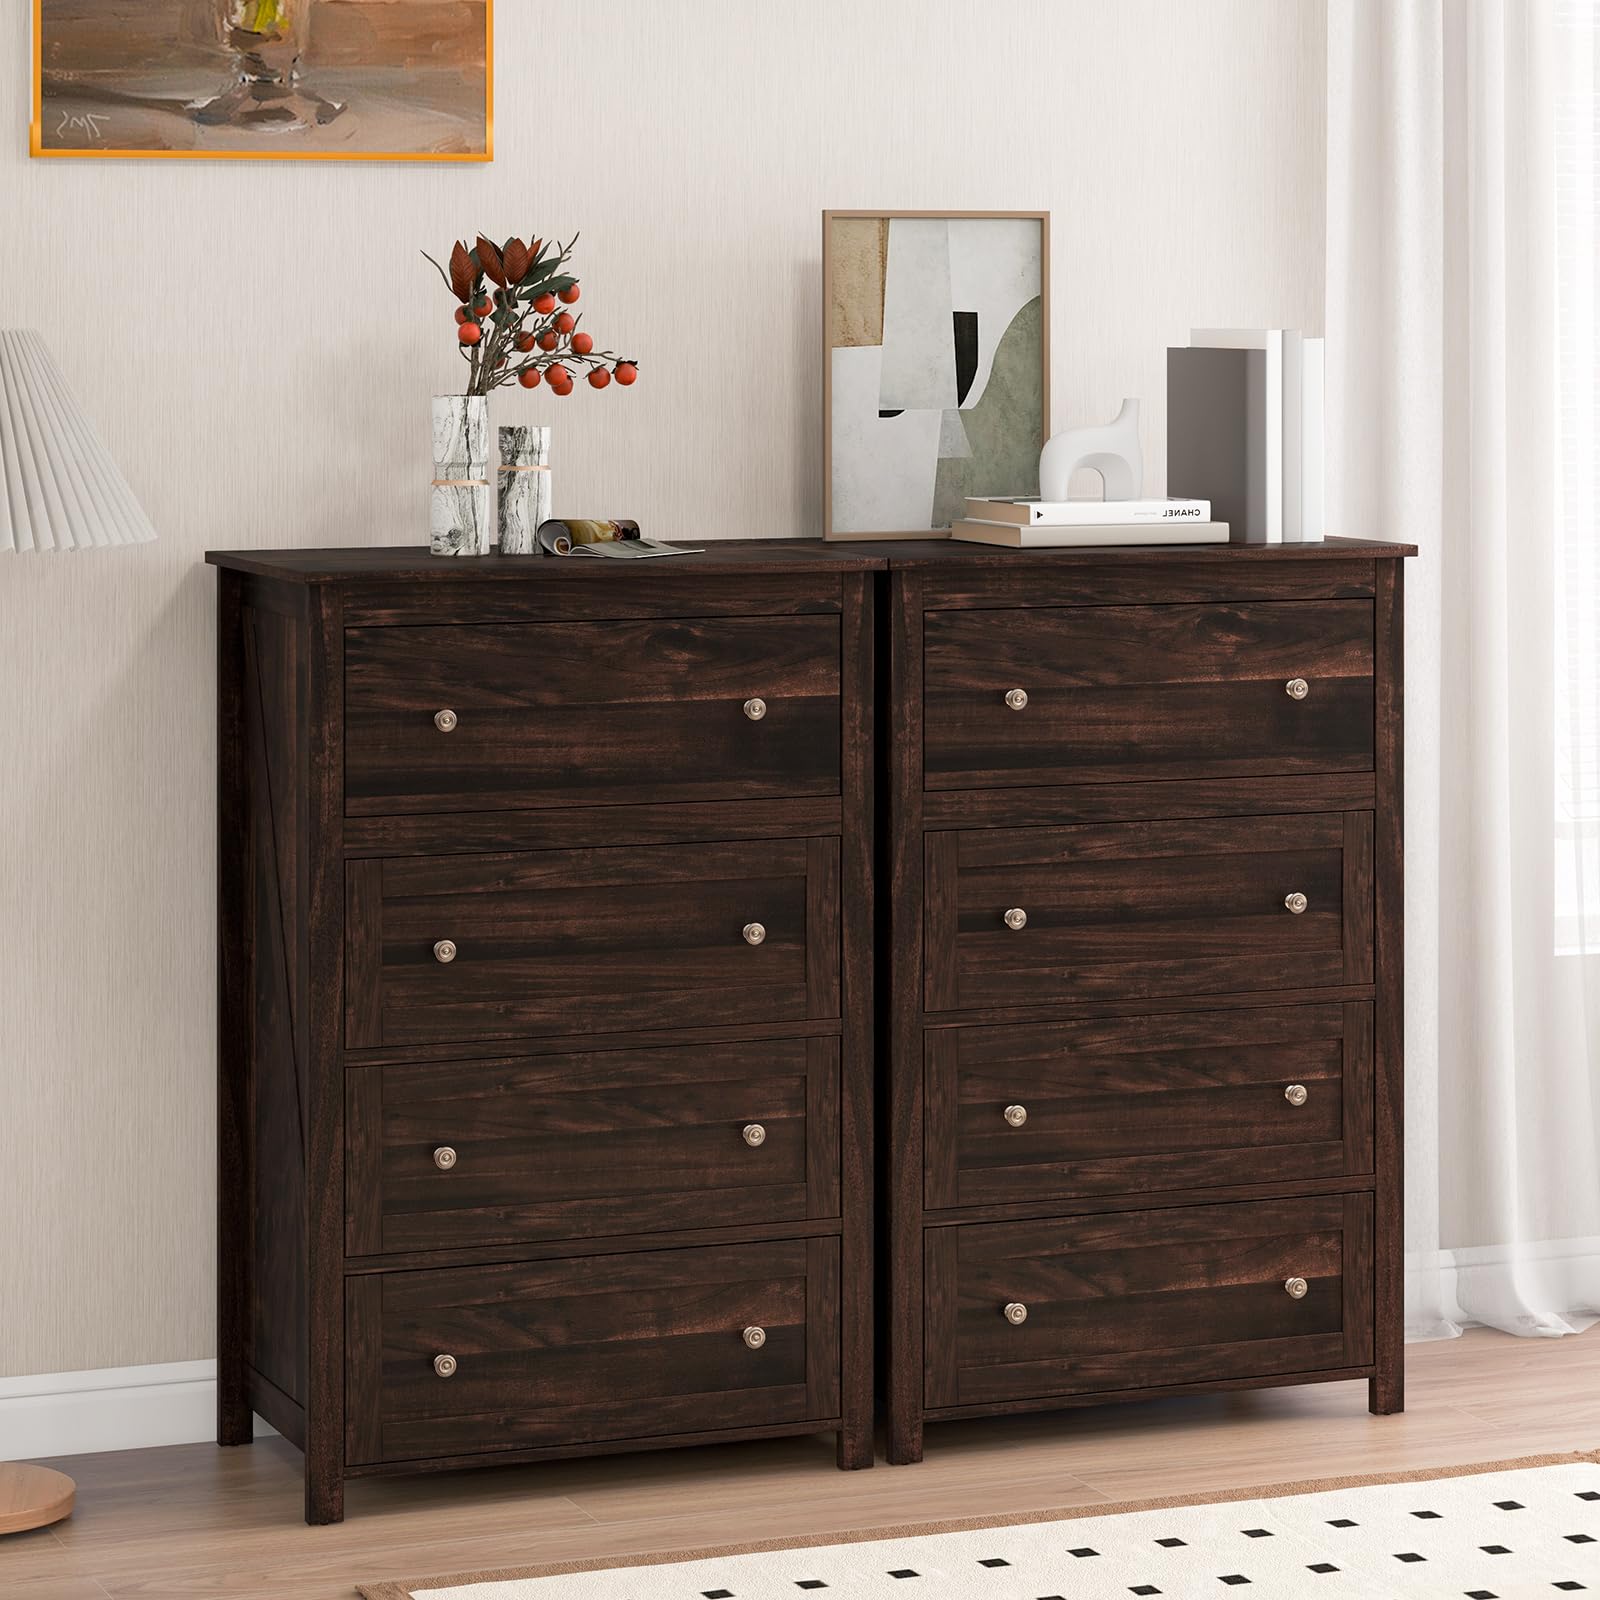 Giantex 4 Drawer Dresser for Bedroom, Drawer of Chest with Anti-tilt Device, Anti-Slip Foot-Pads, Brown